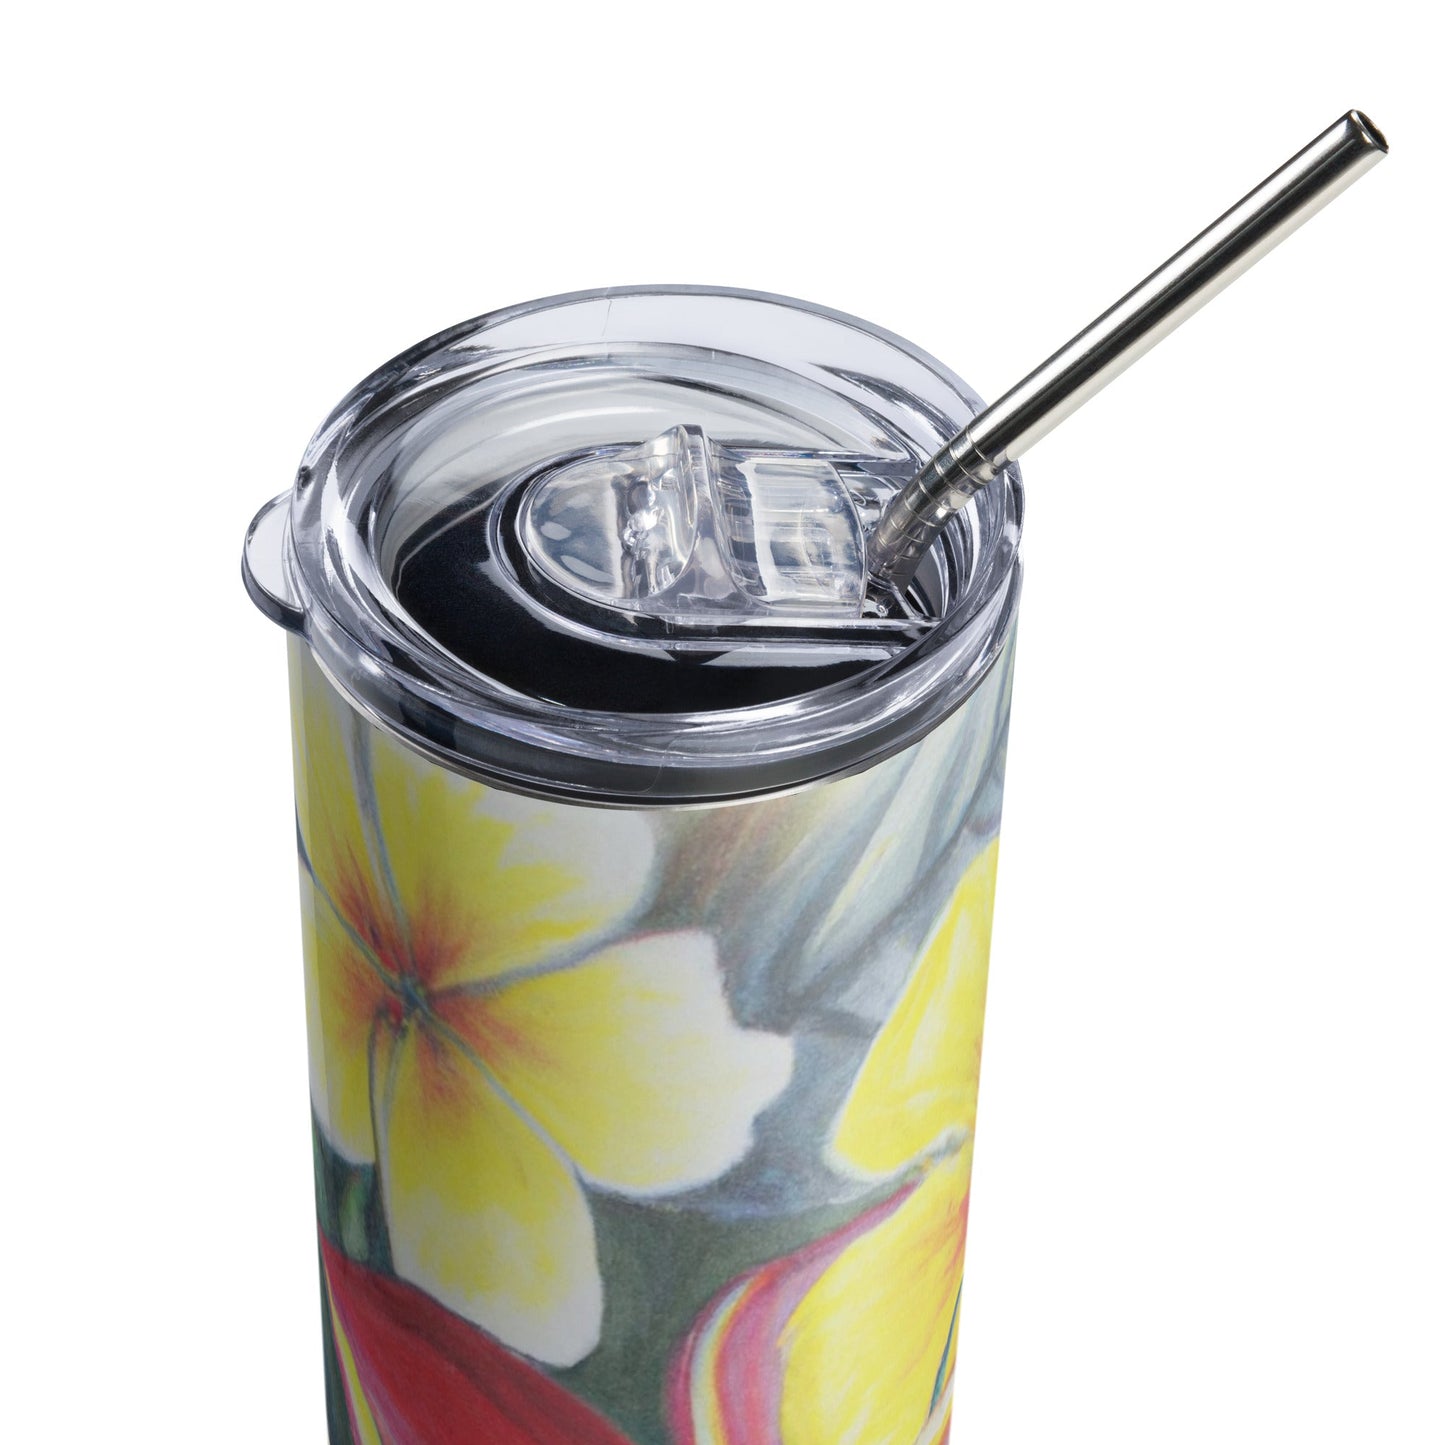 Stainless steel tumbler - Sunzout Outdoor Spaces LLC